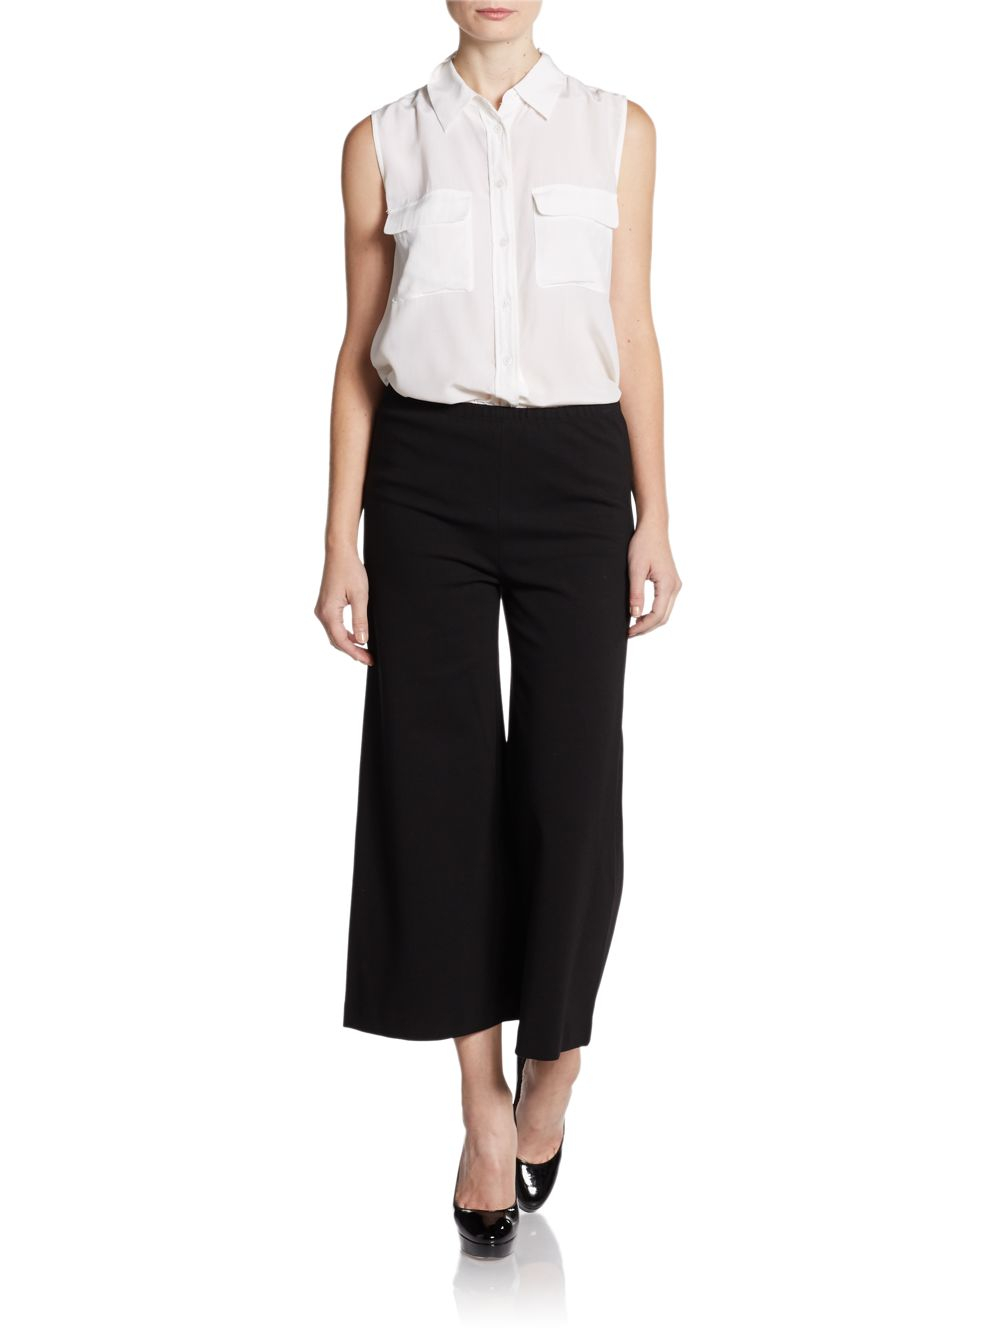 Lyst - Lafayette 148 new york Cropped Gaucho Pants in Black